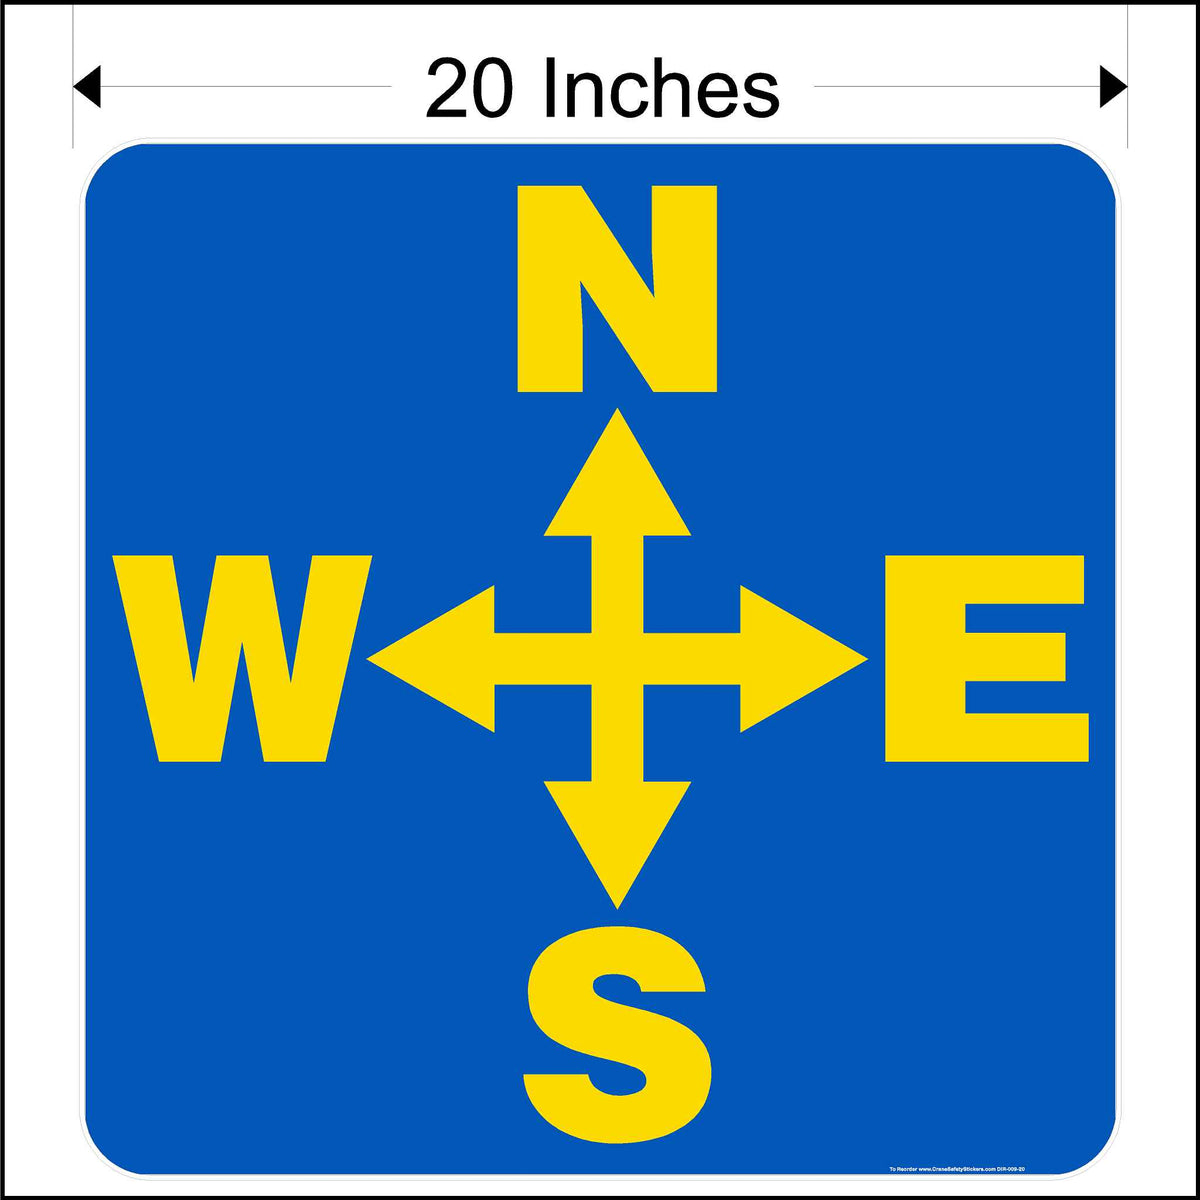 20 inch overhead crane directional decal printed with yellow north, south, east, and west arrows on a blue background.